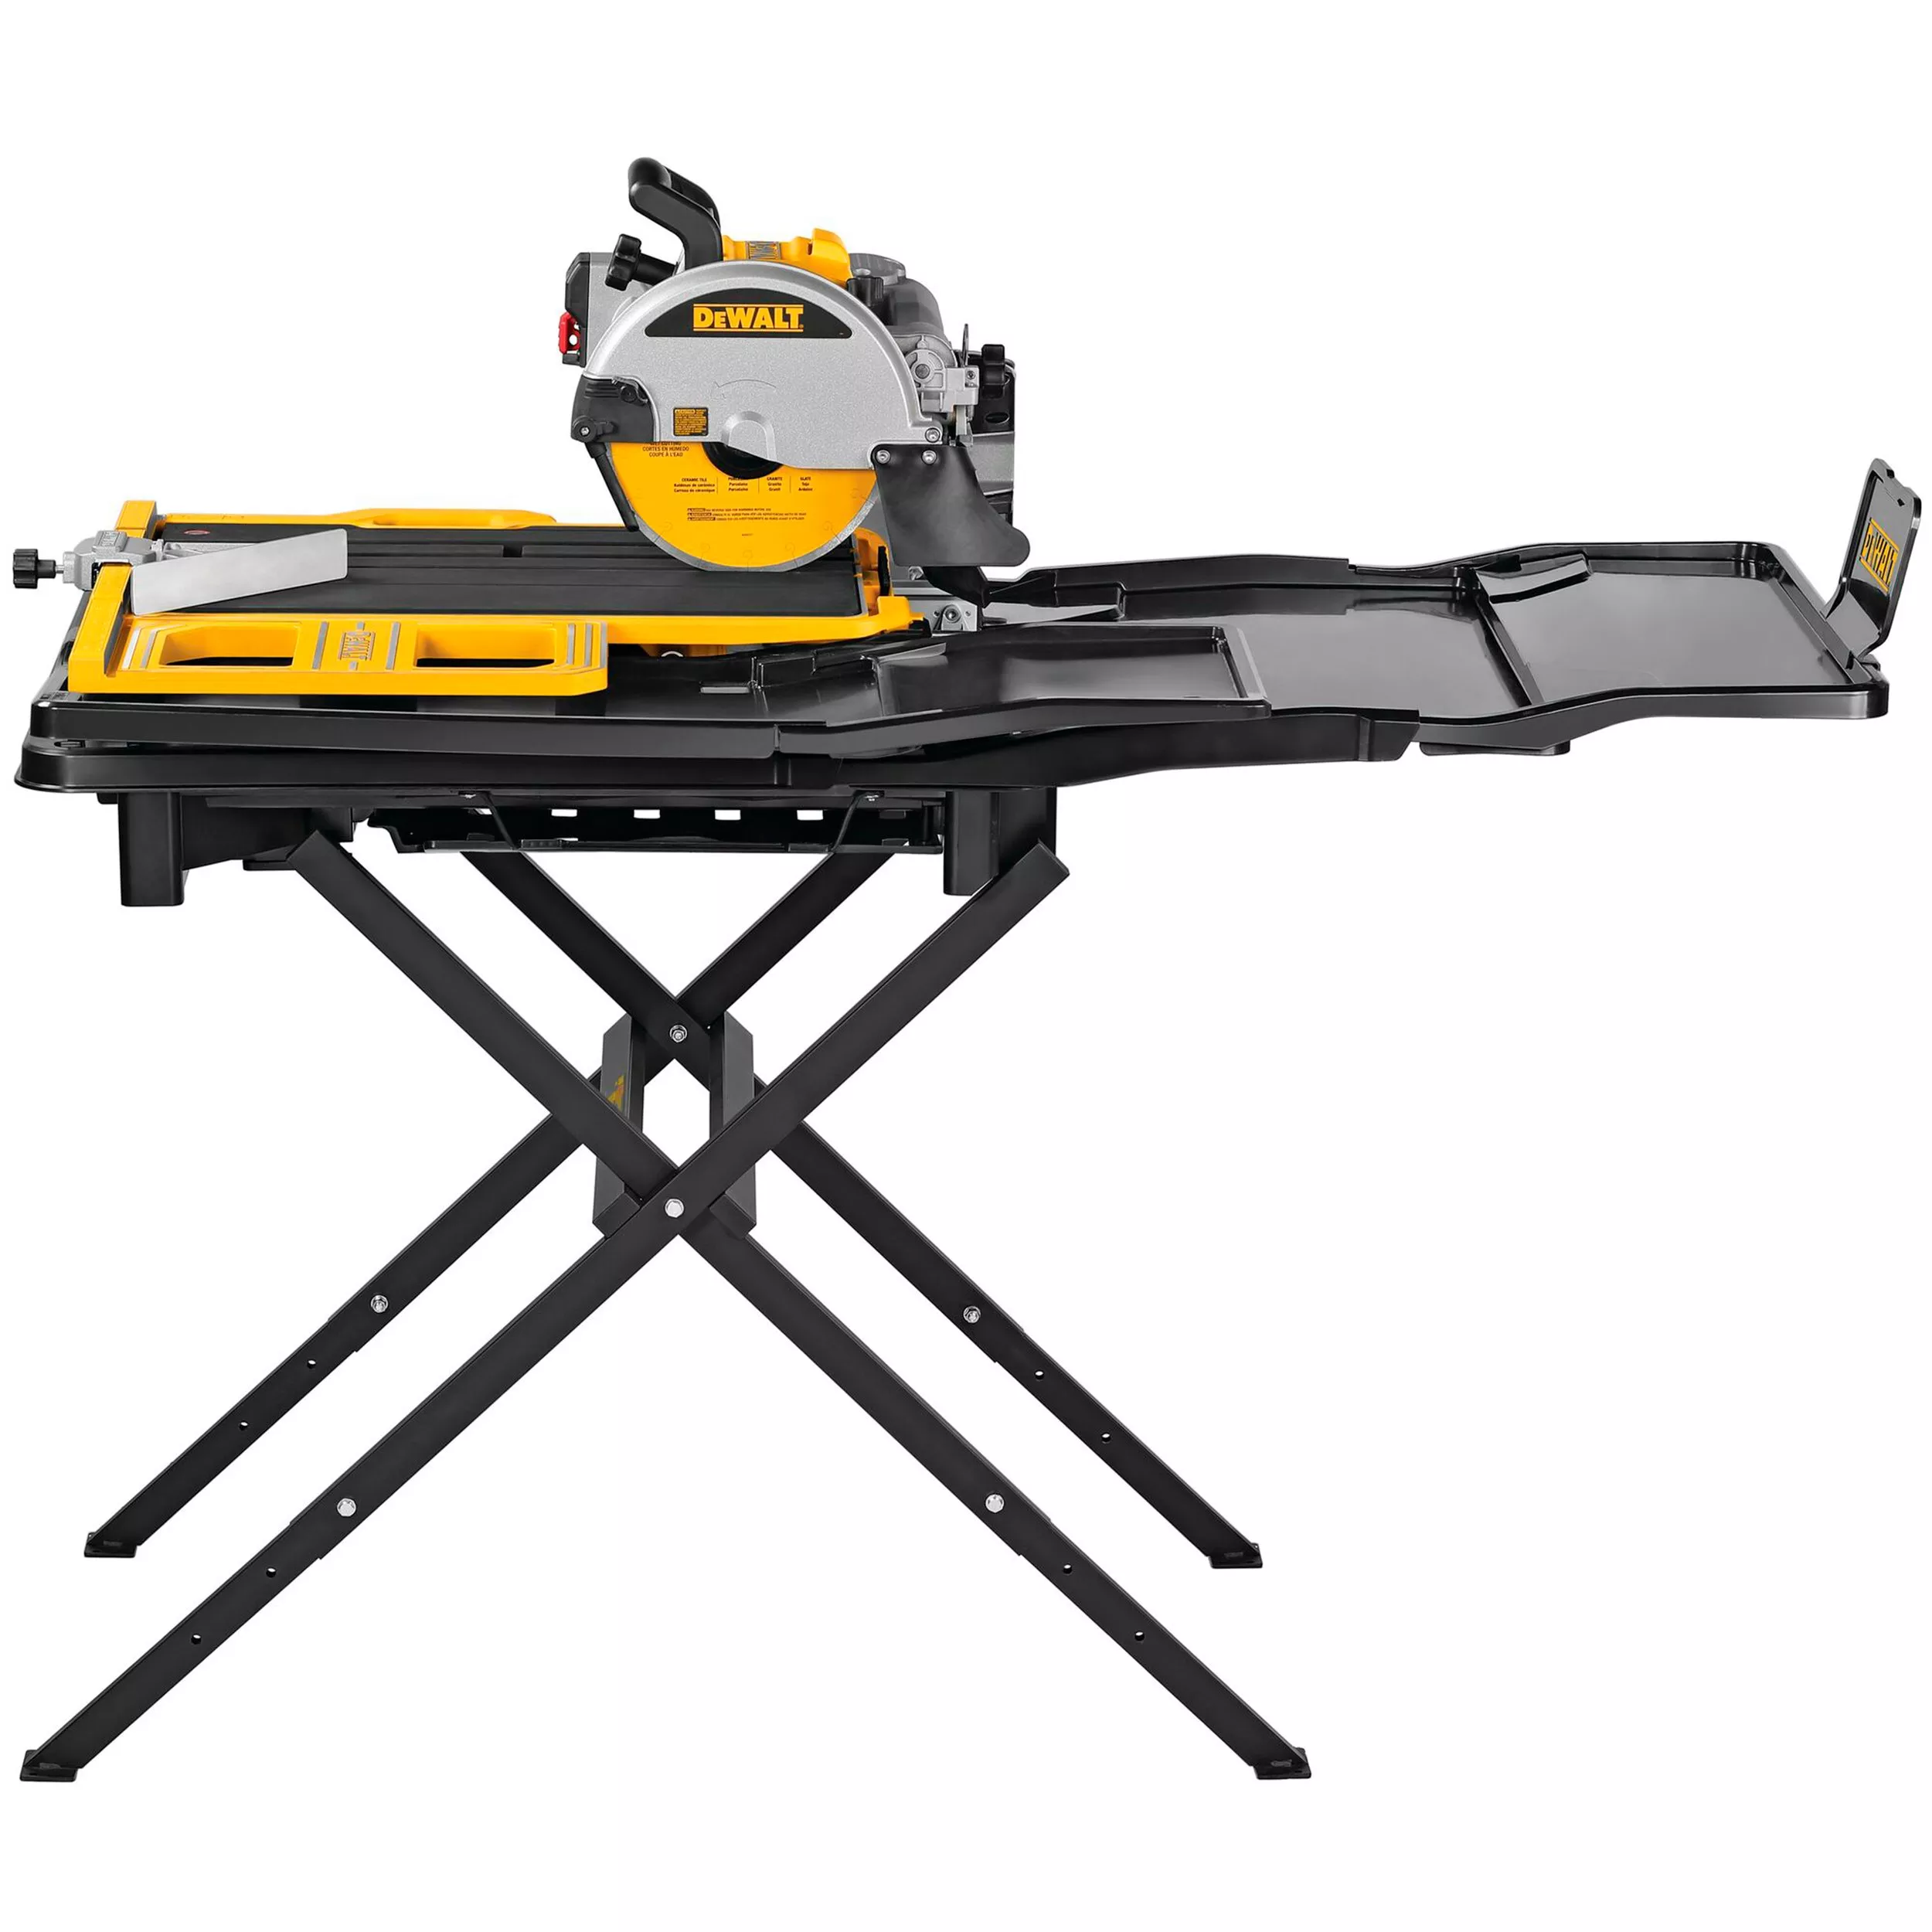 Dewalt 10in High Capacity Wet Tile Saw with Stand